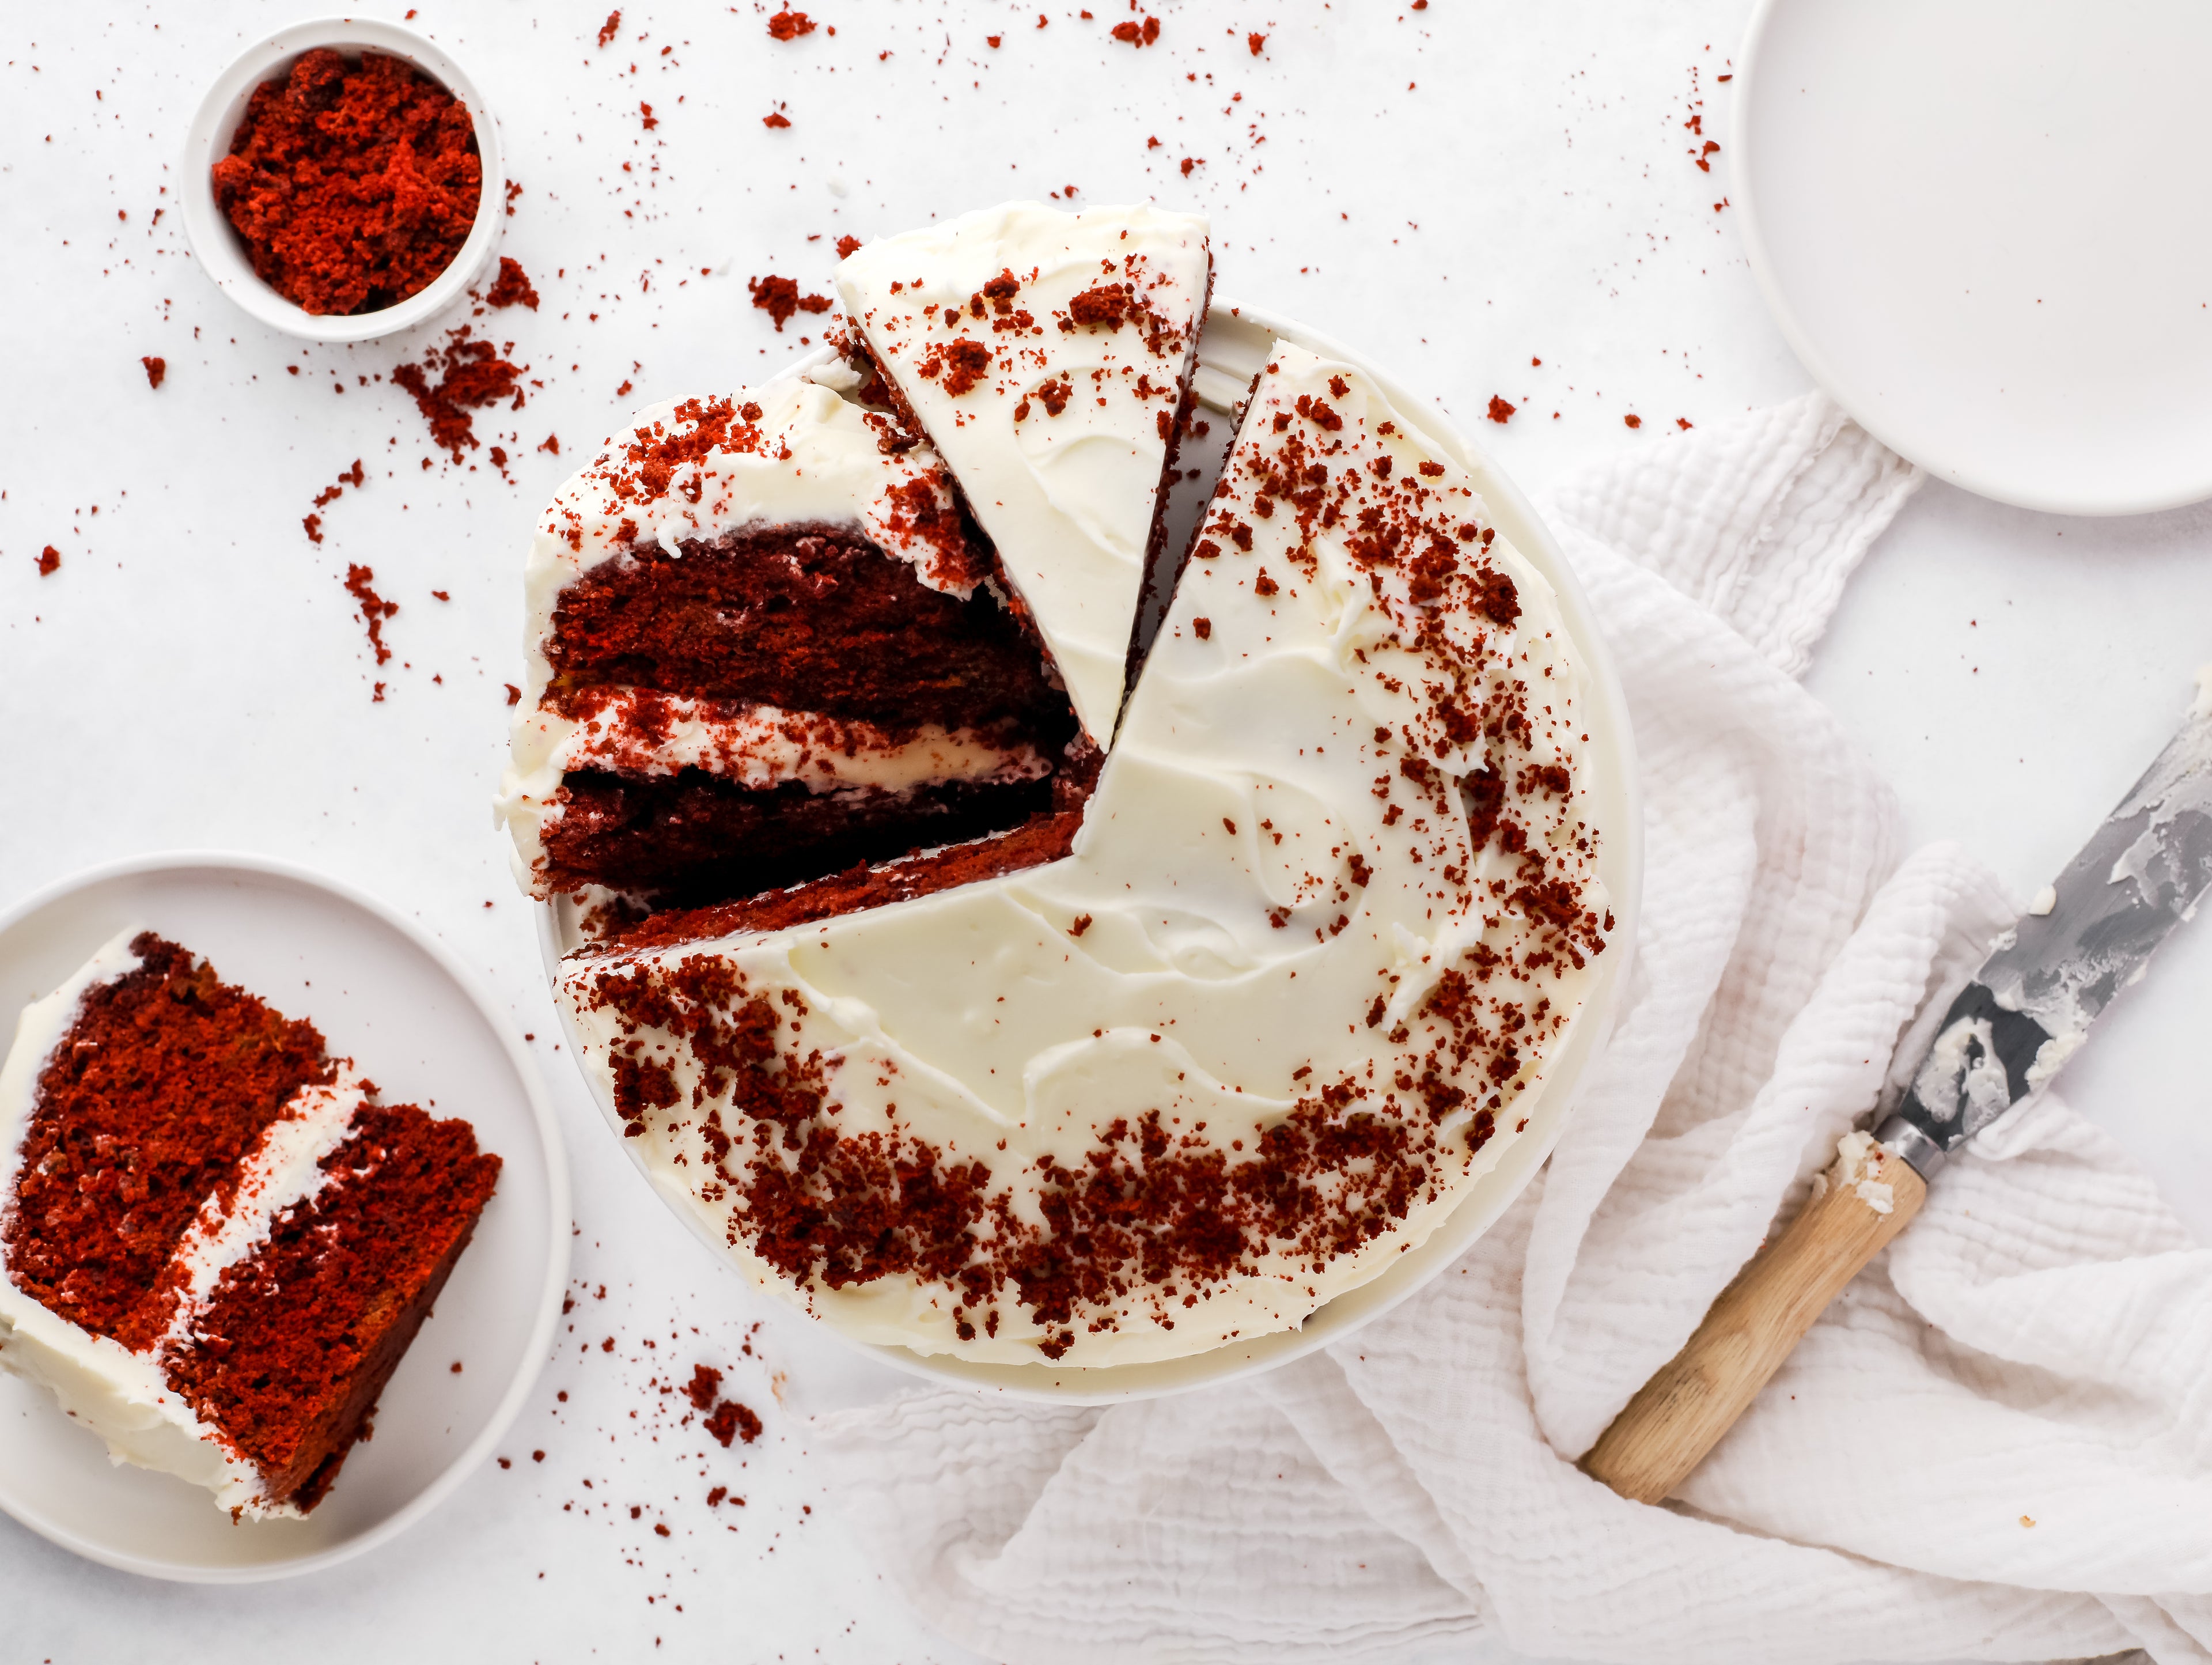 Top down shot of a sliced red velvet cake beside a cake knife and a slice on a plate